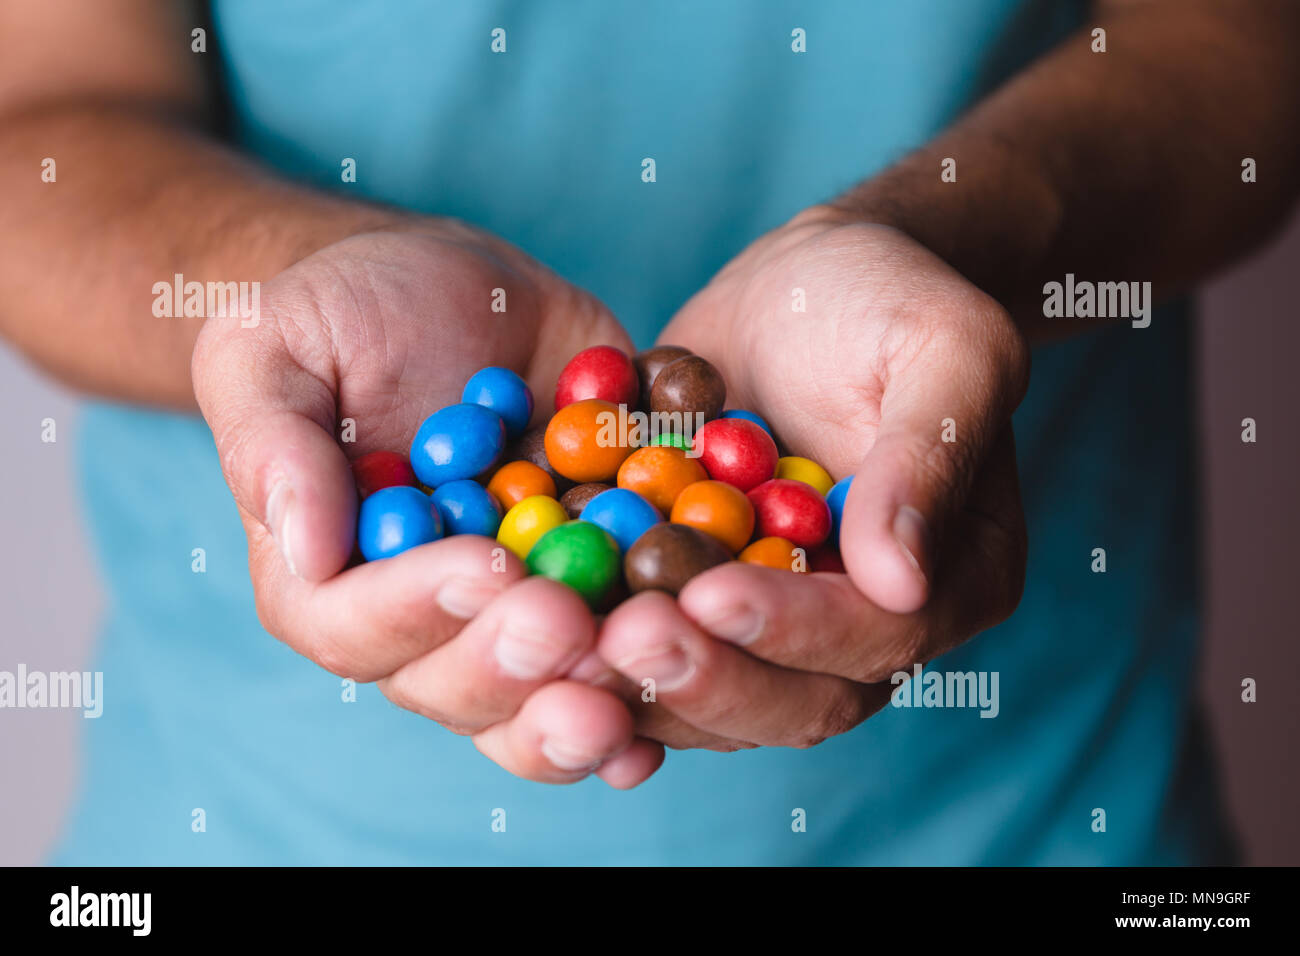 Caucasian male holding colored candies Stock Photo